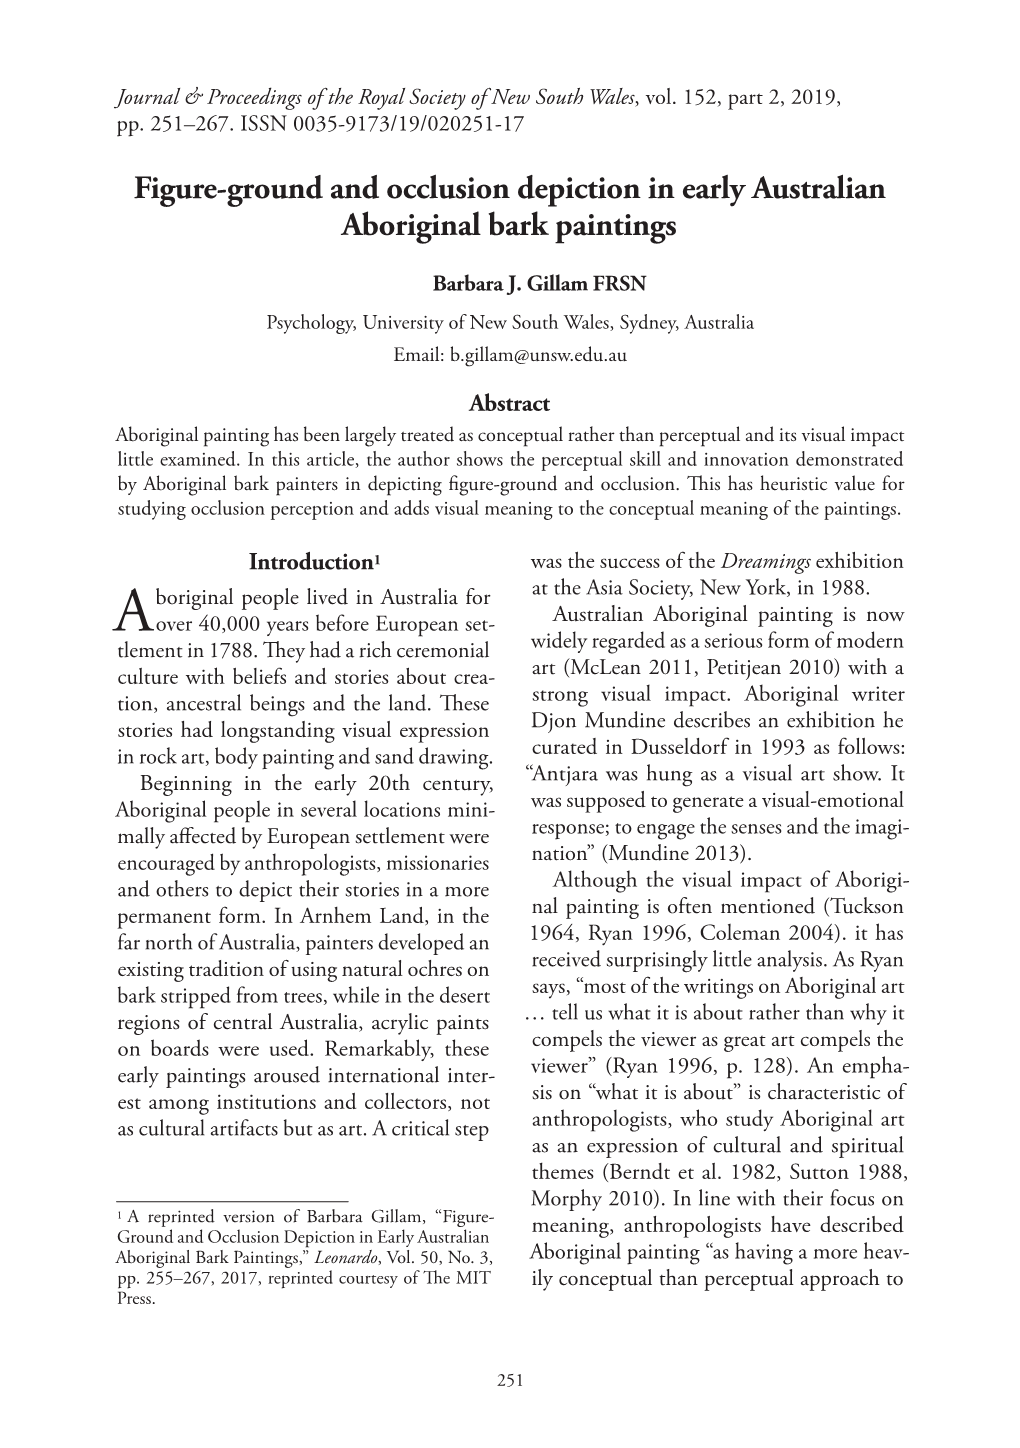 Figure-Ground and Occlusion Depiction in Early Australian Aboriginal Bark Paintings